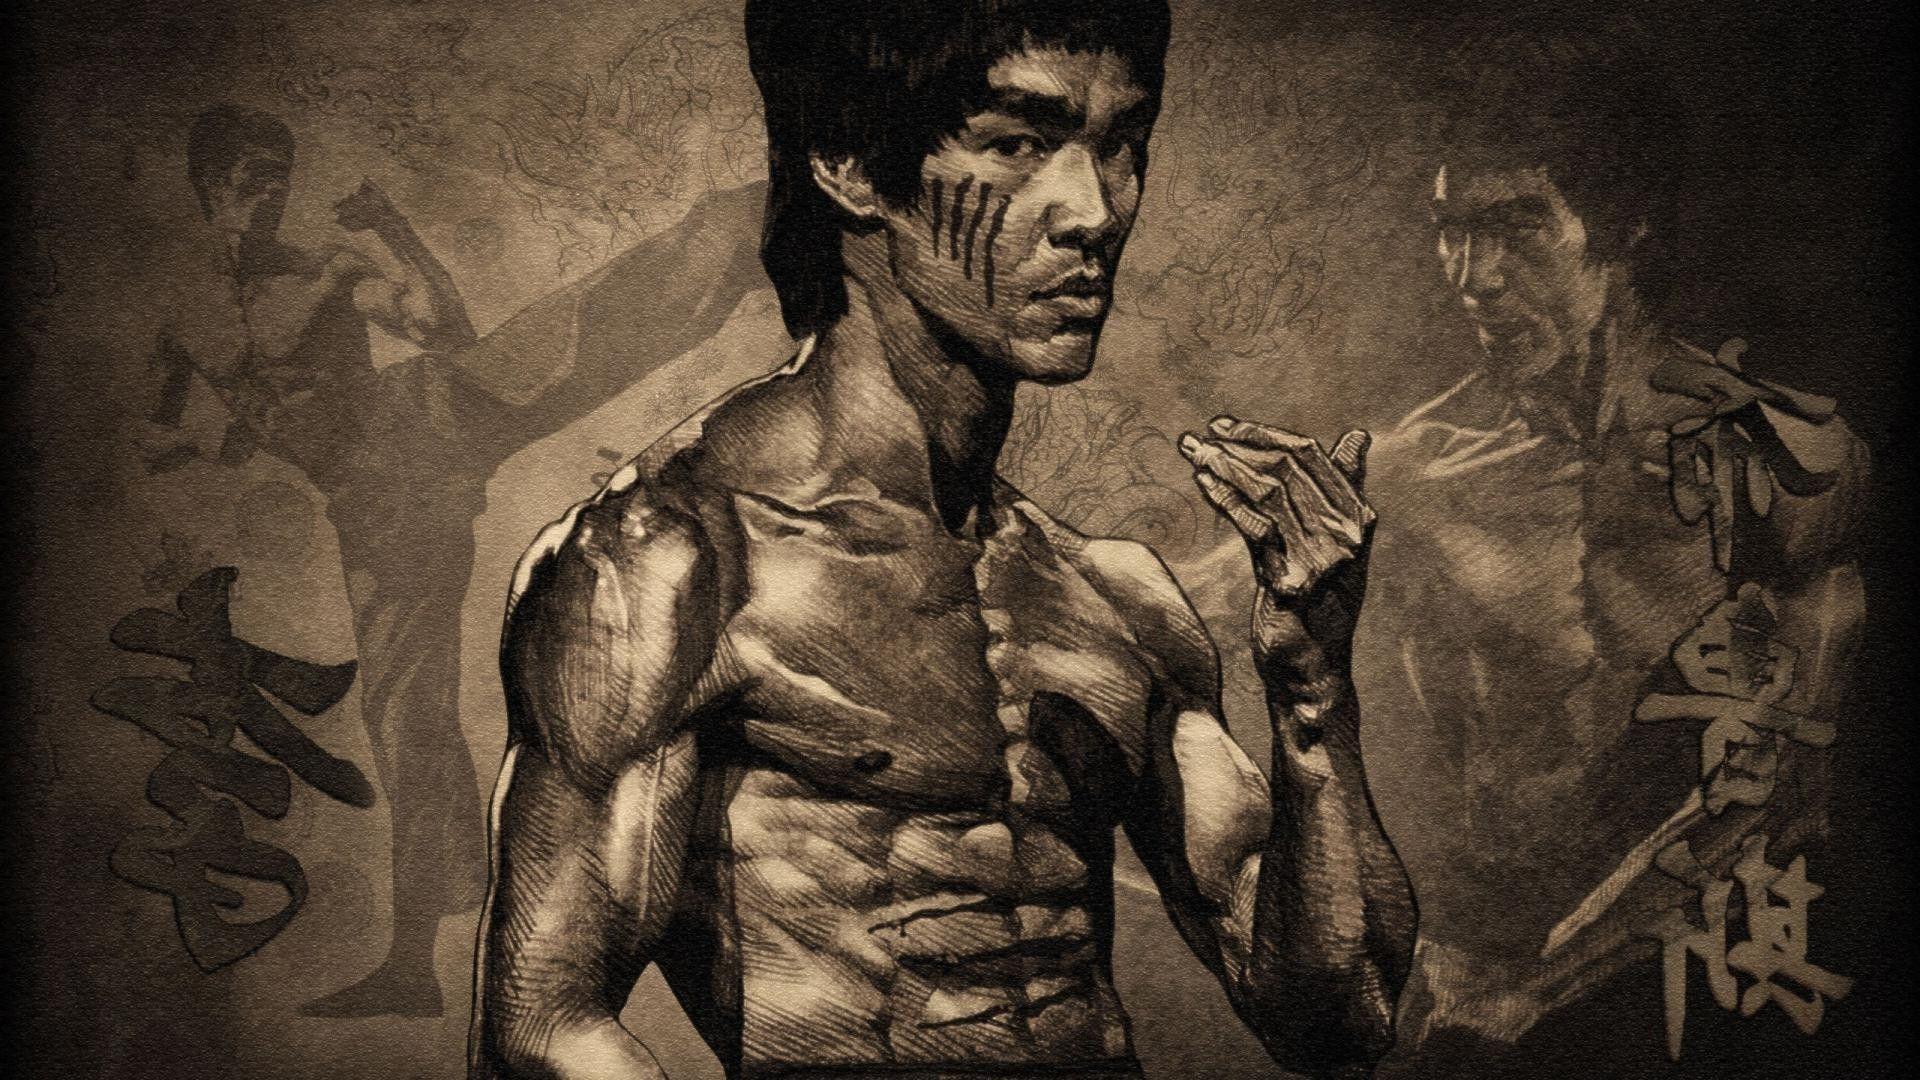 Lee, View: Bruce Lee, Wallpaper and Picture for mobile and desktop